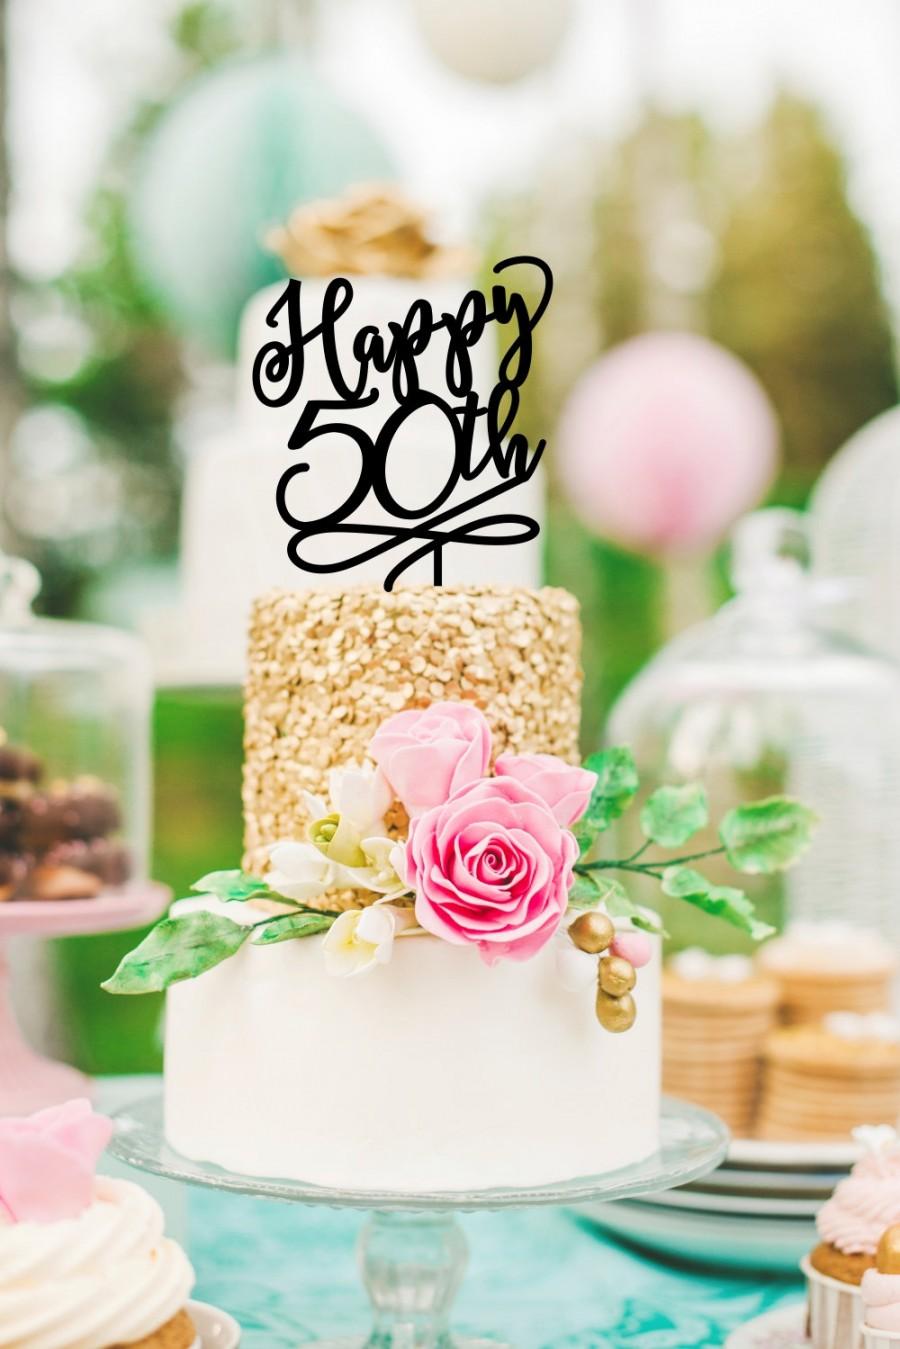 Mariage - 50th Birthday Cake Topper - Happy 50th Cake Topper - 50th Anniversary Cake Topper